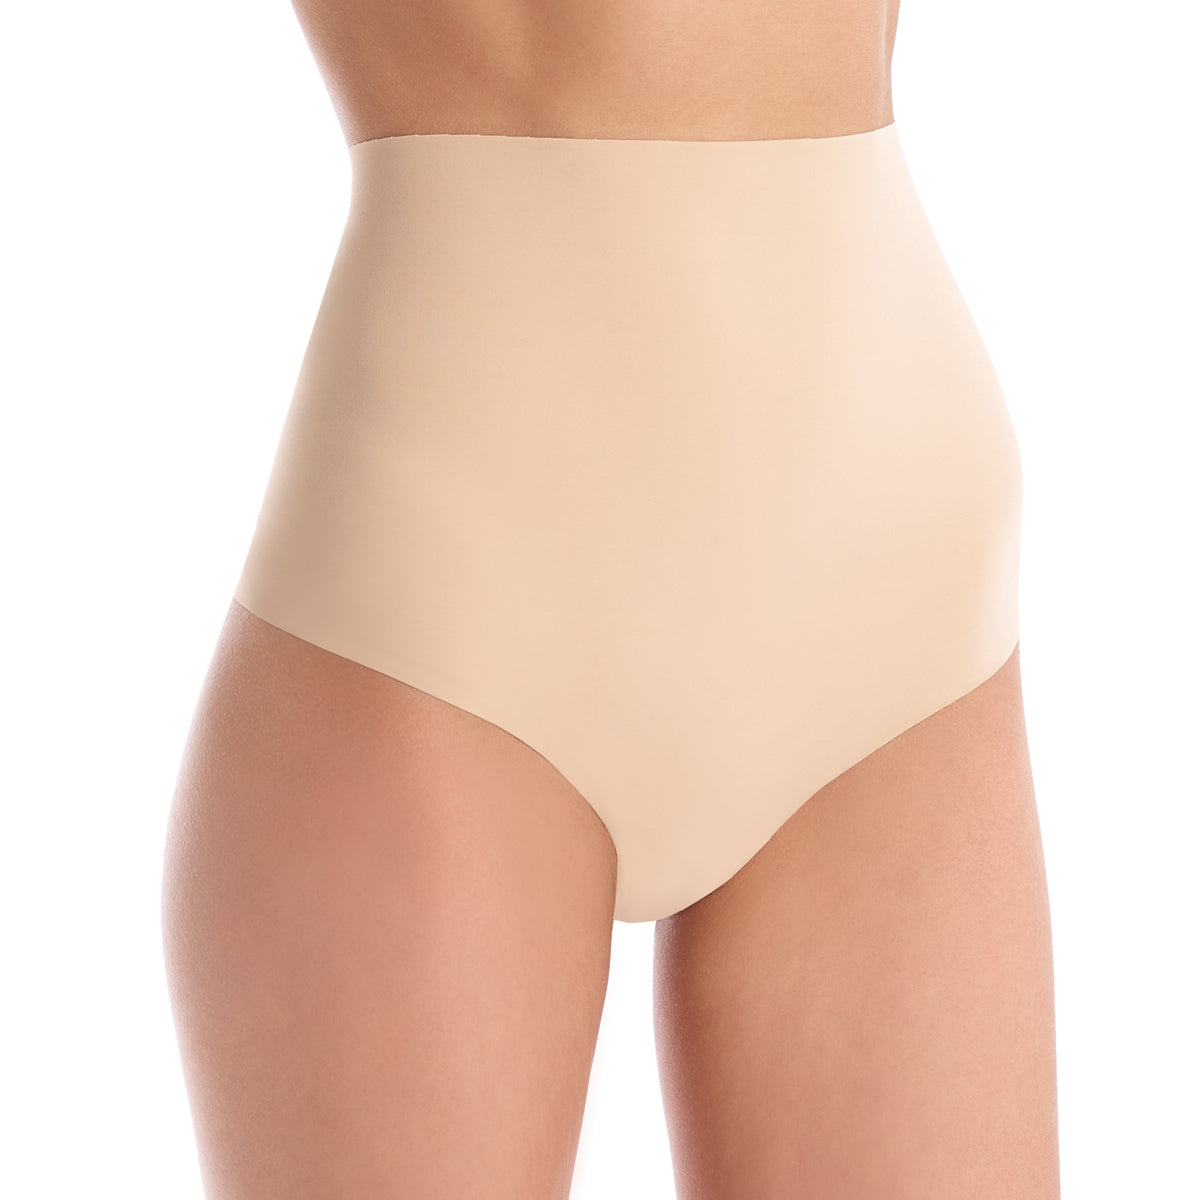 RESTOCKED: The Compression Short and Lace Compression Thong! Now